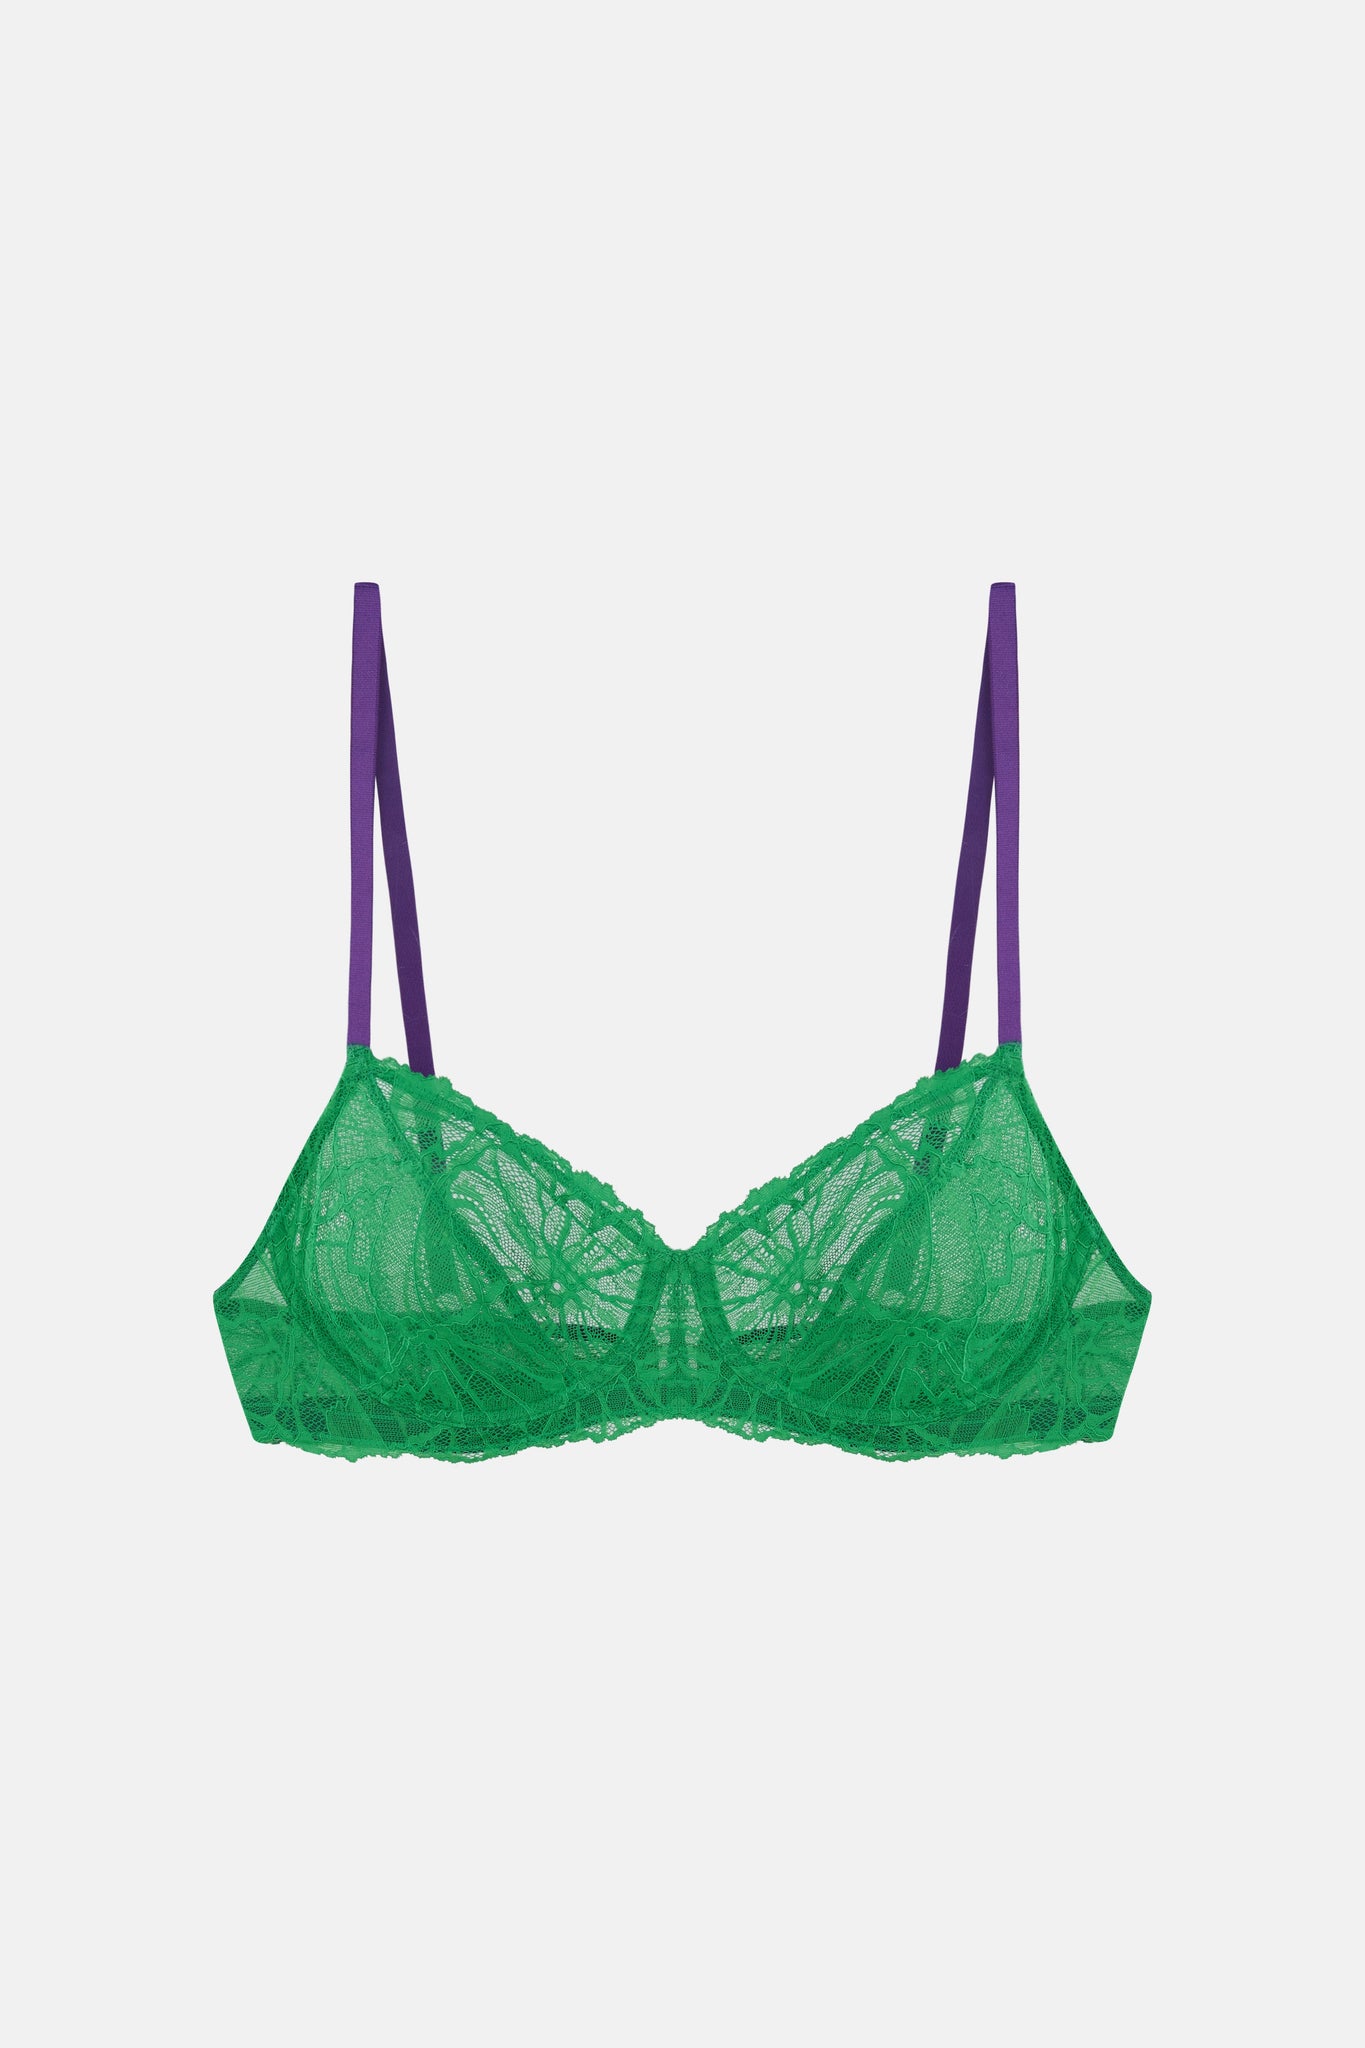 Rainbow Shops Womens Plus Size Scalloped Trim Lace Balconette Bra, Converts to Strapless, Green, Size 38D